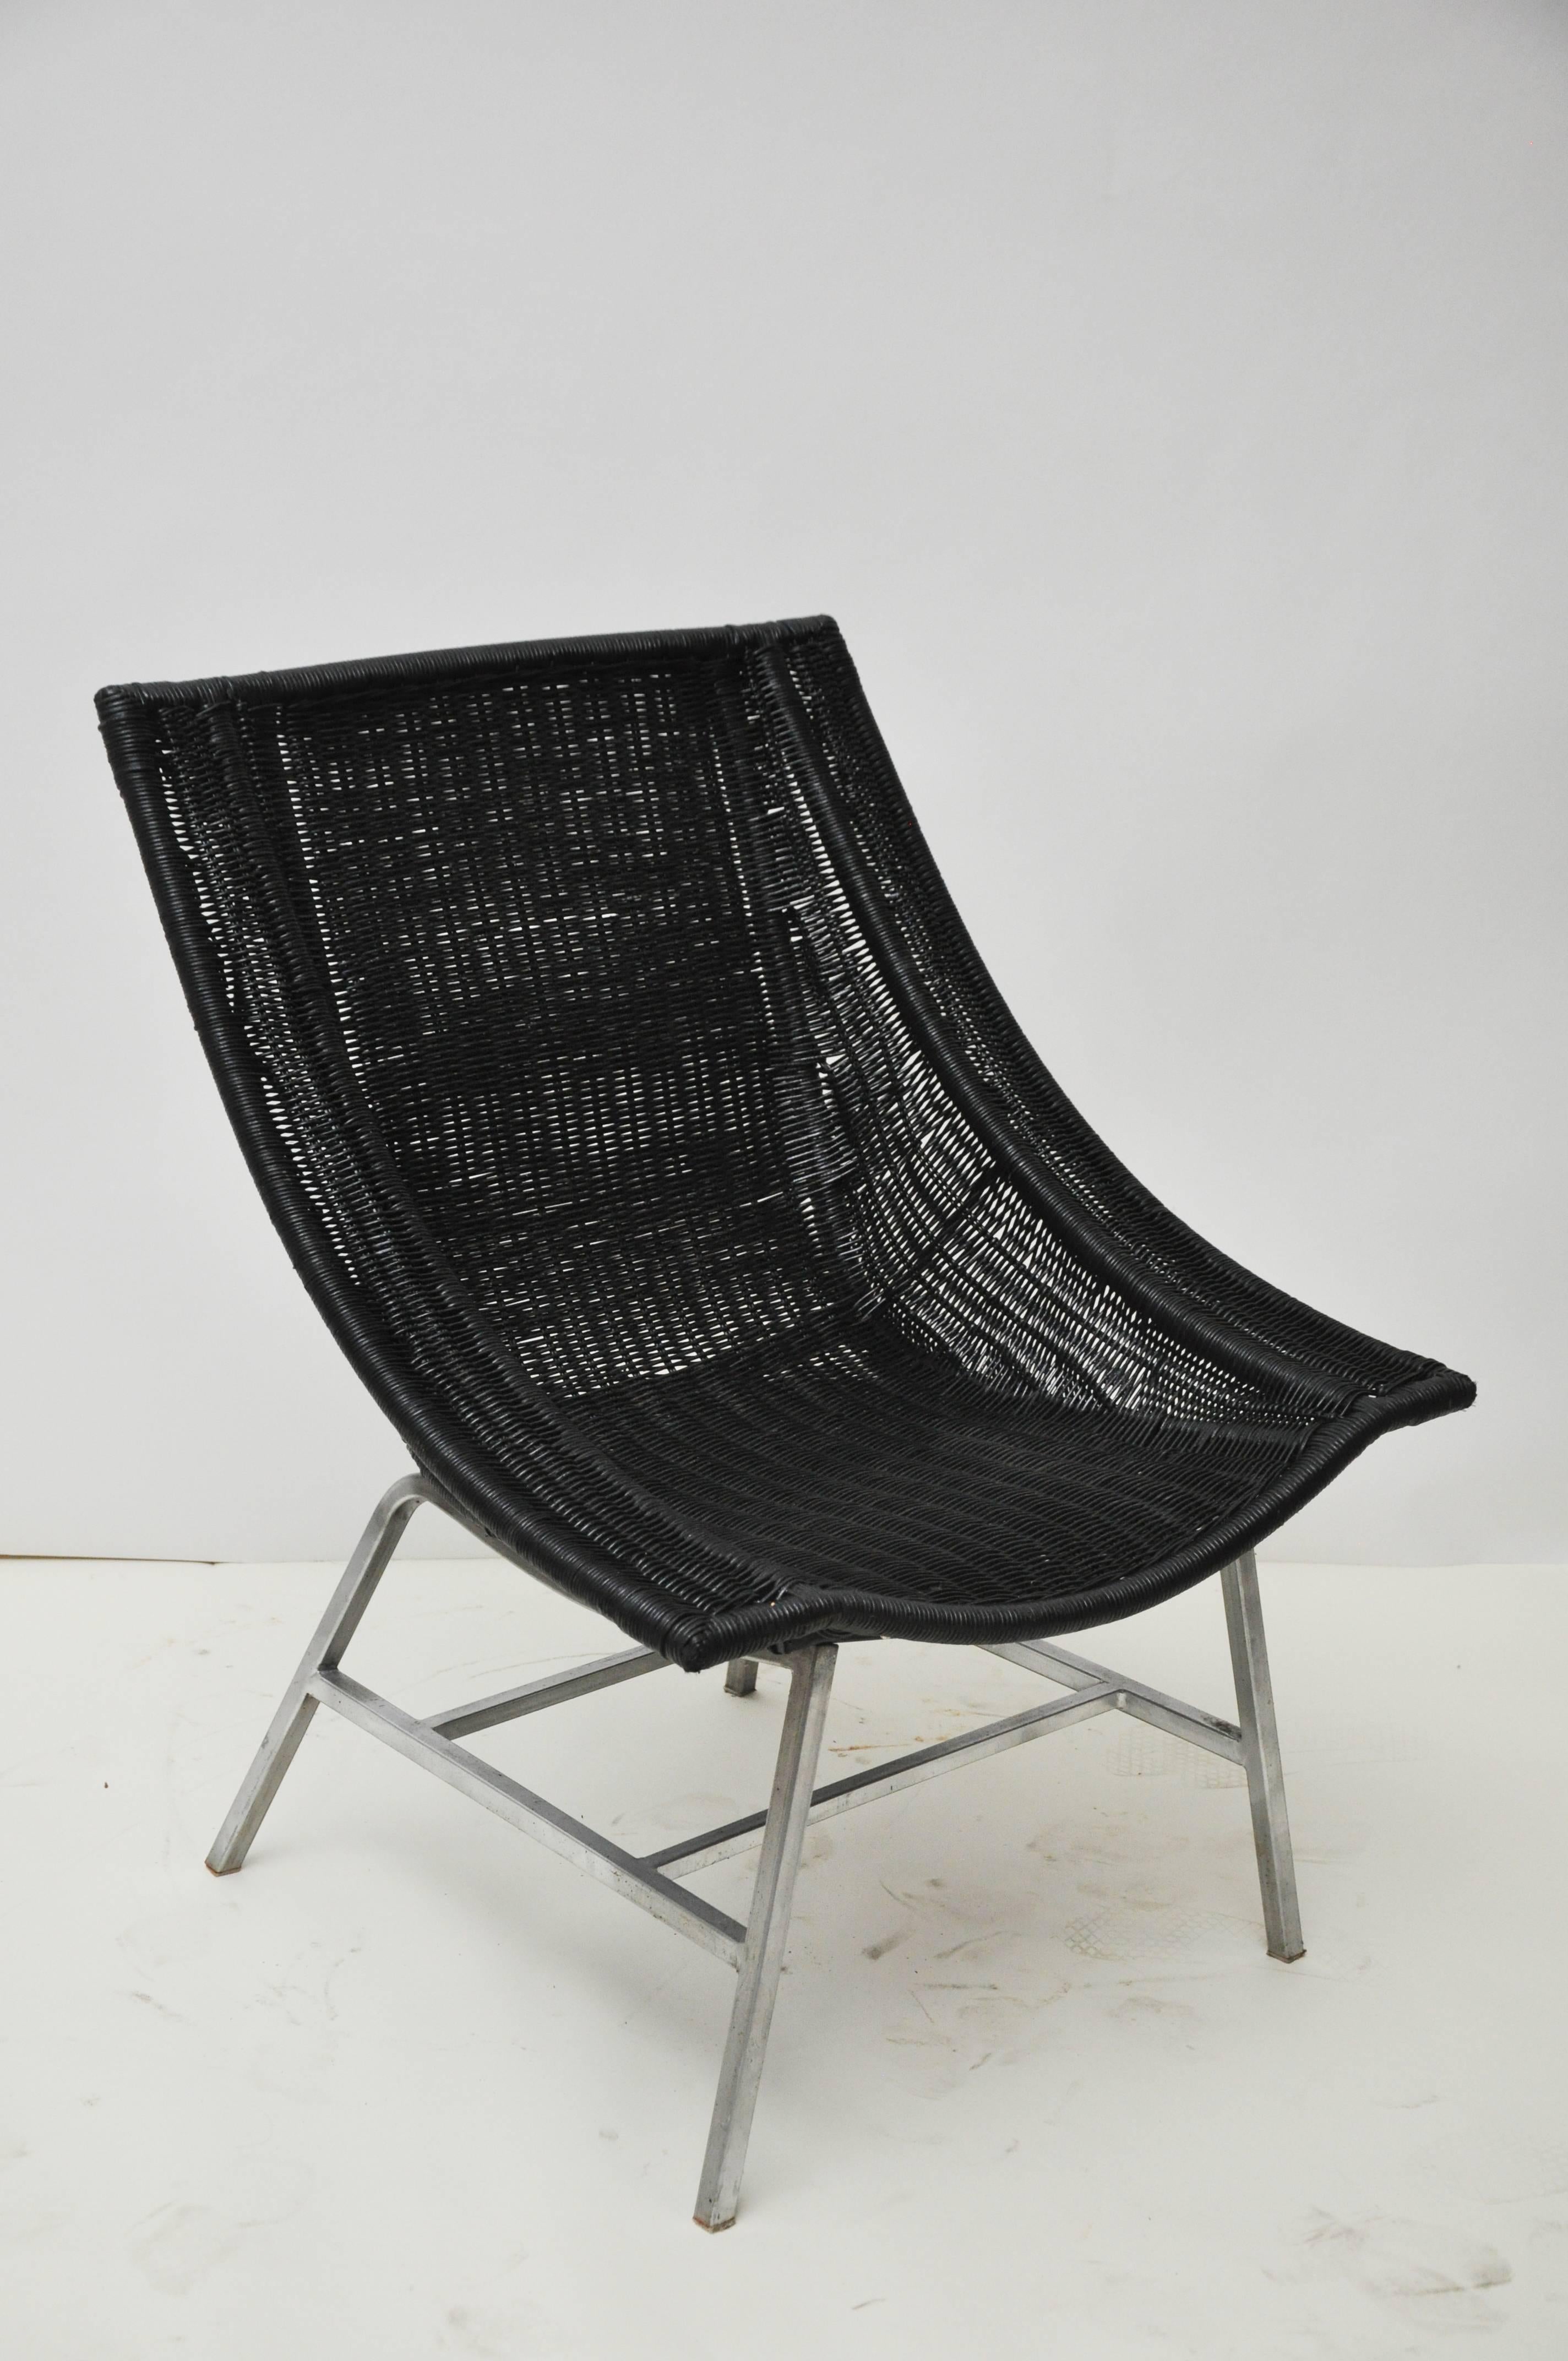 Woven Mid-Century Modern Wicker Chair For Sale